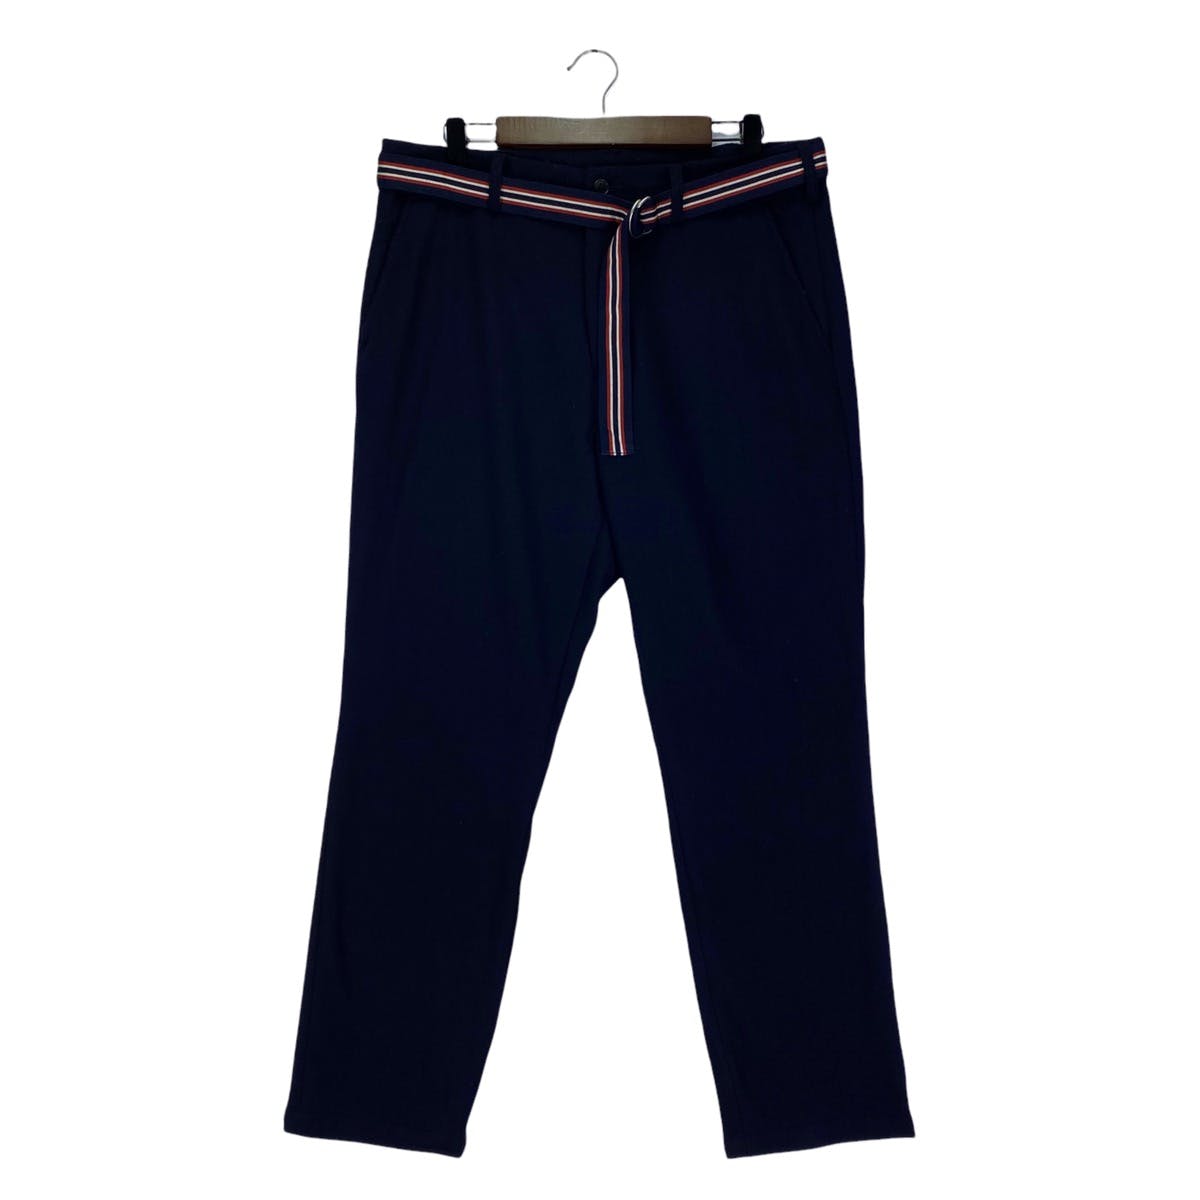 Fred Perry Navy Blue Trouser - 2